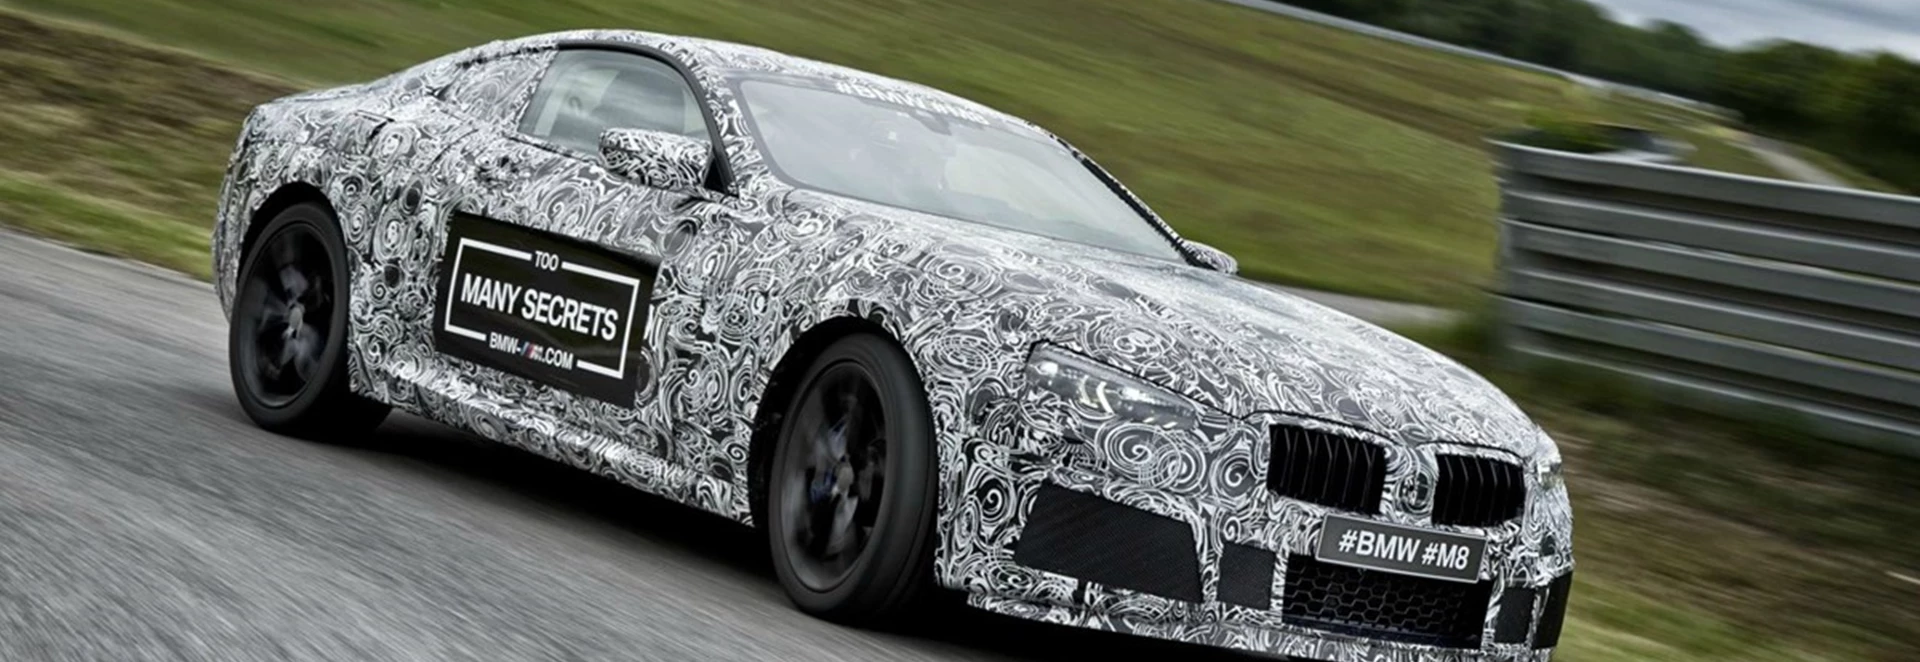 BMW confirms the M8 is coming 